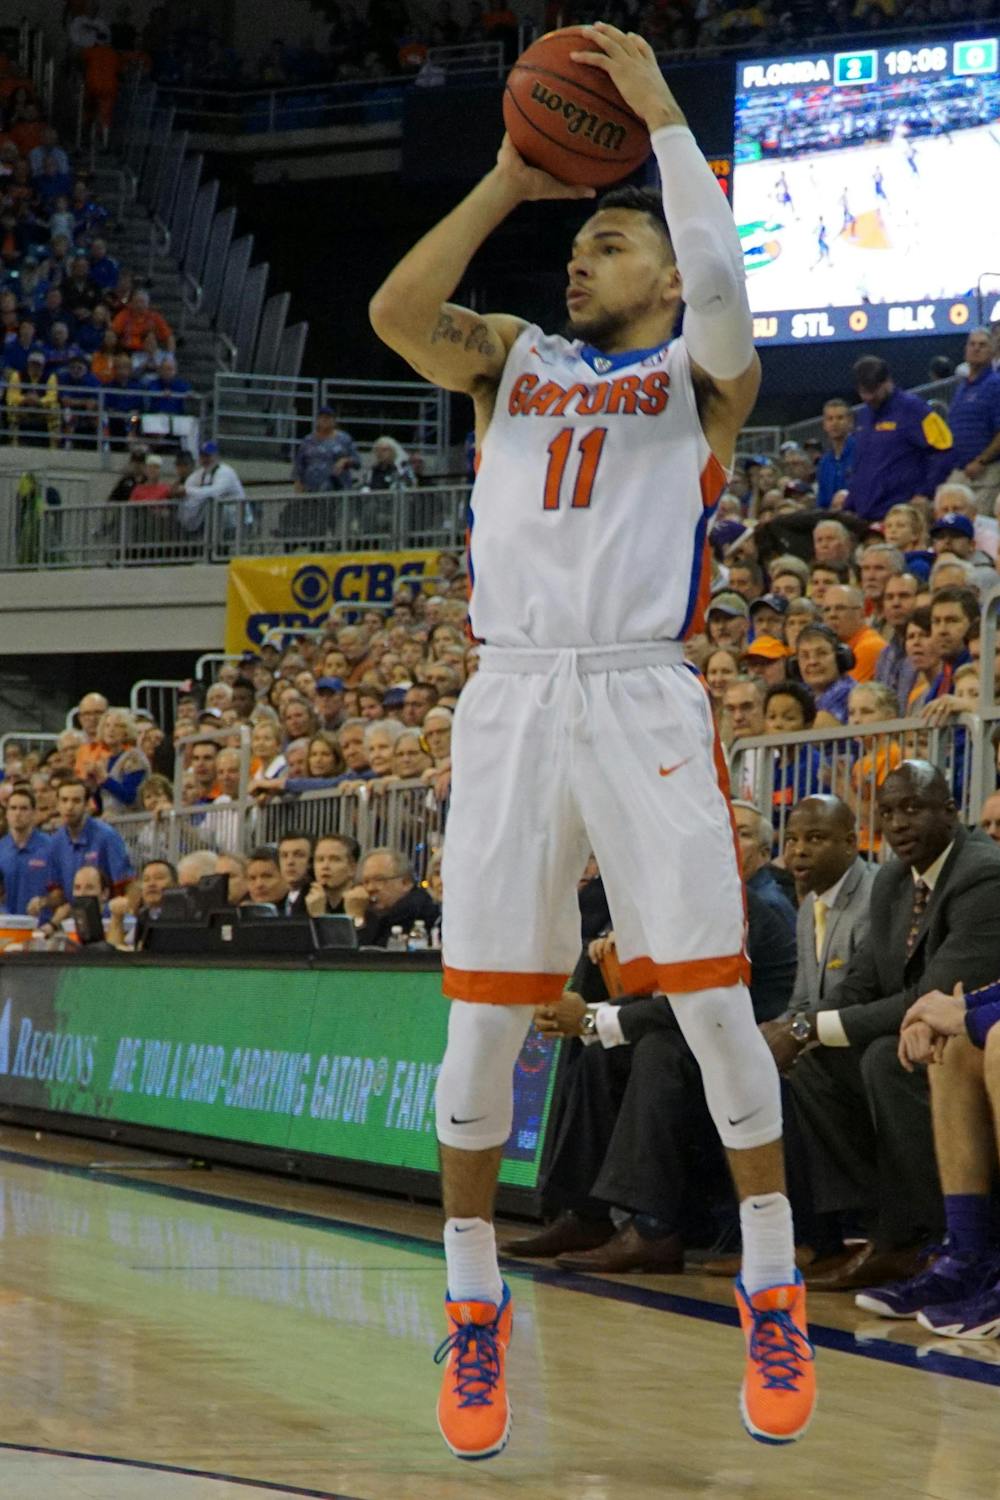 <p>UF guard Chris Chiozza shoots a three-pointer during Florida’s 68-62 win over LSU on Jan. 9, 2016, in the O’Connell Center.</p>